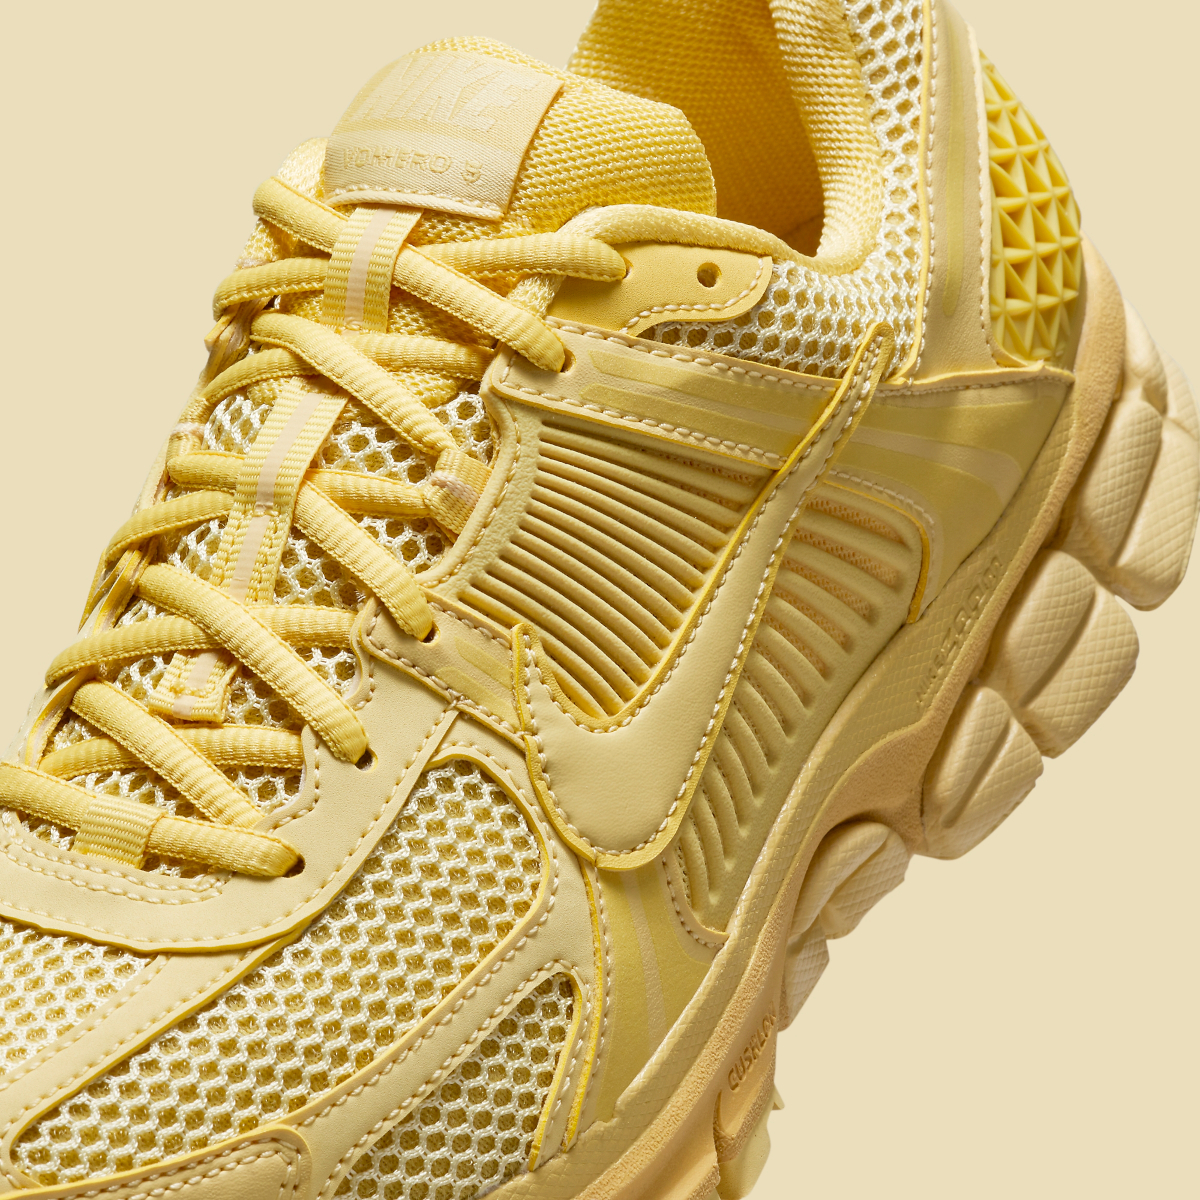 Nike For a closer look at this upcoming Air Max Plus Saturn Gold Fq7079 700 15